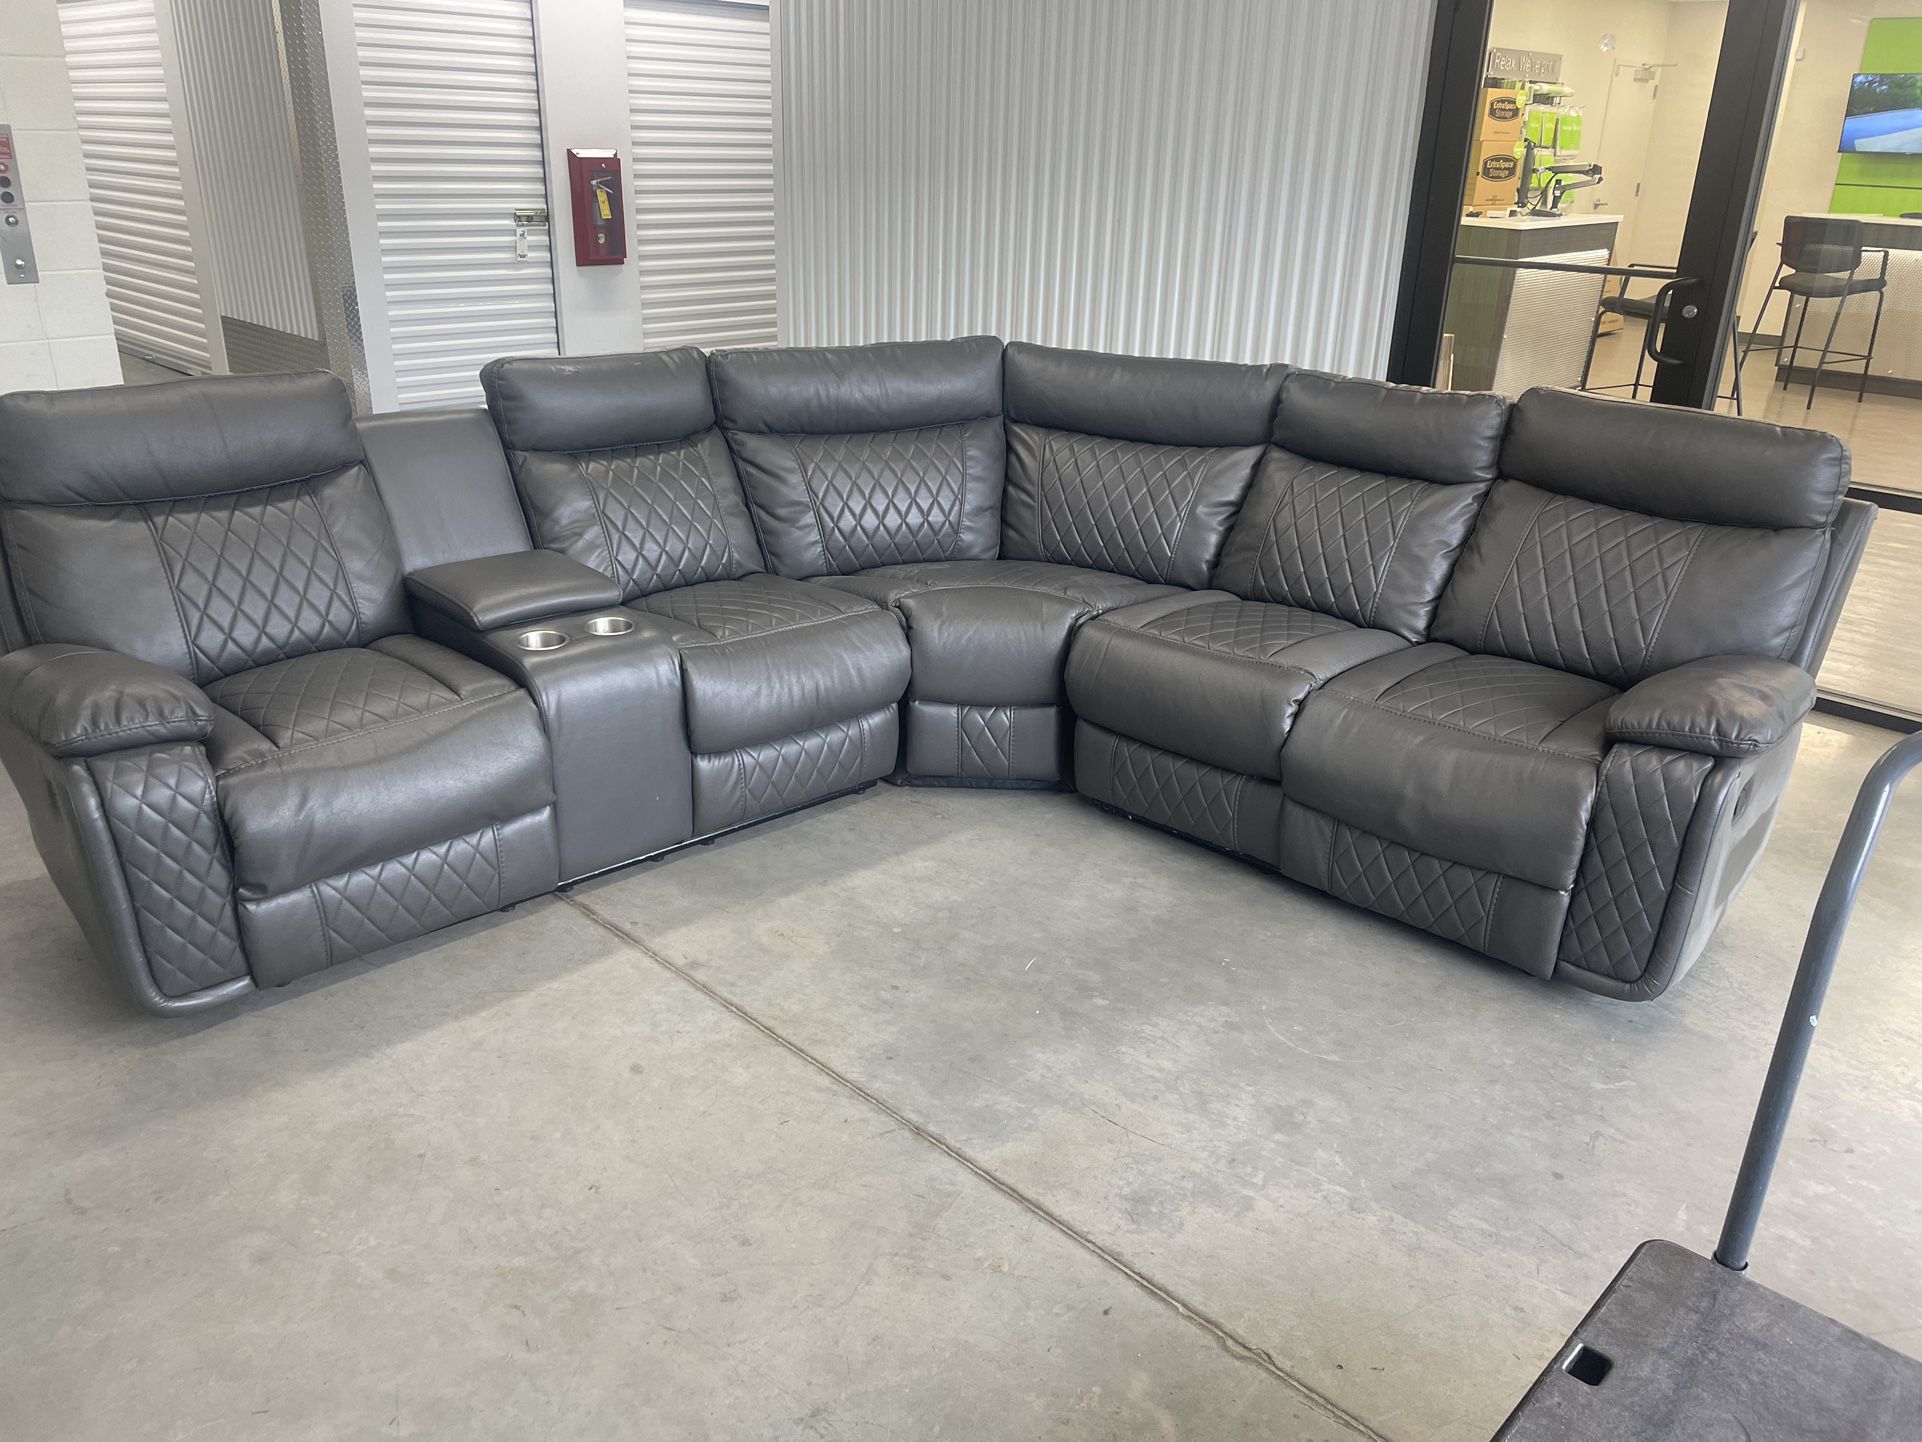 6 seater Faux Leather Reclining Sectional